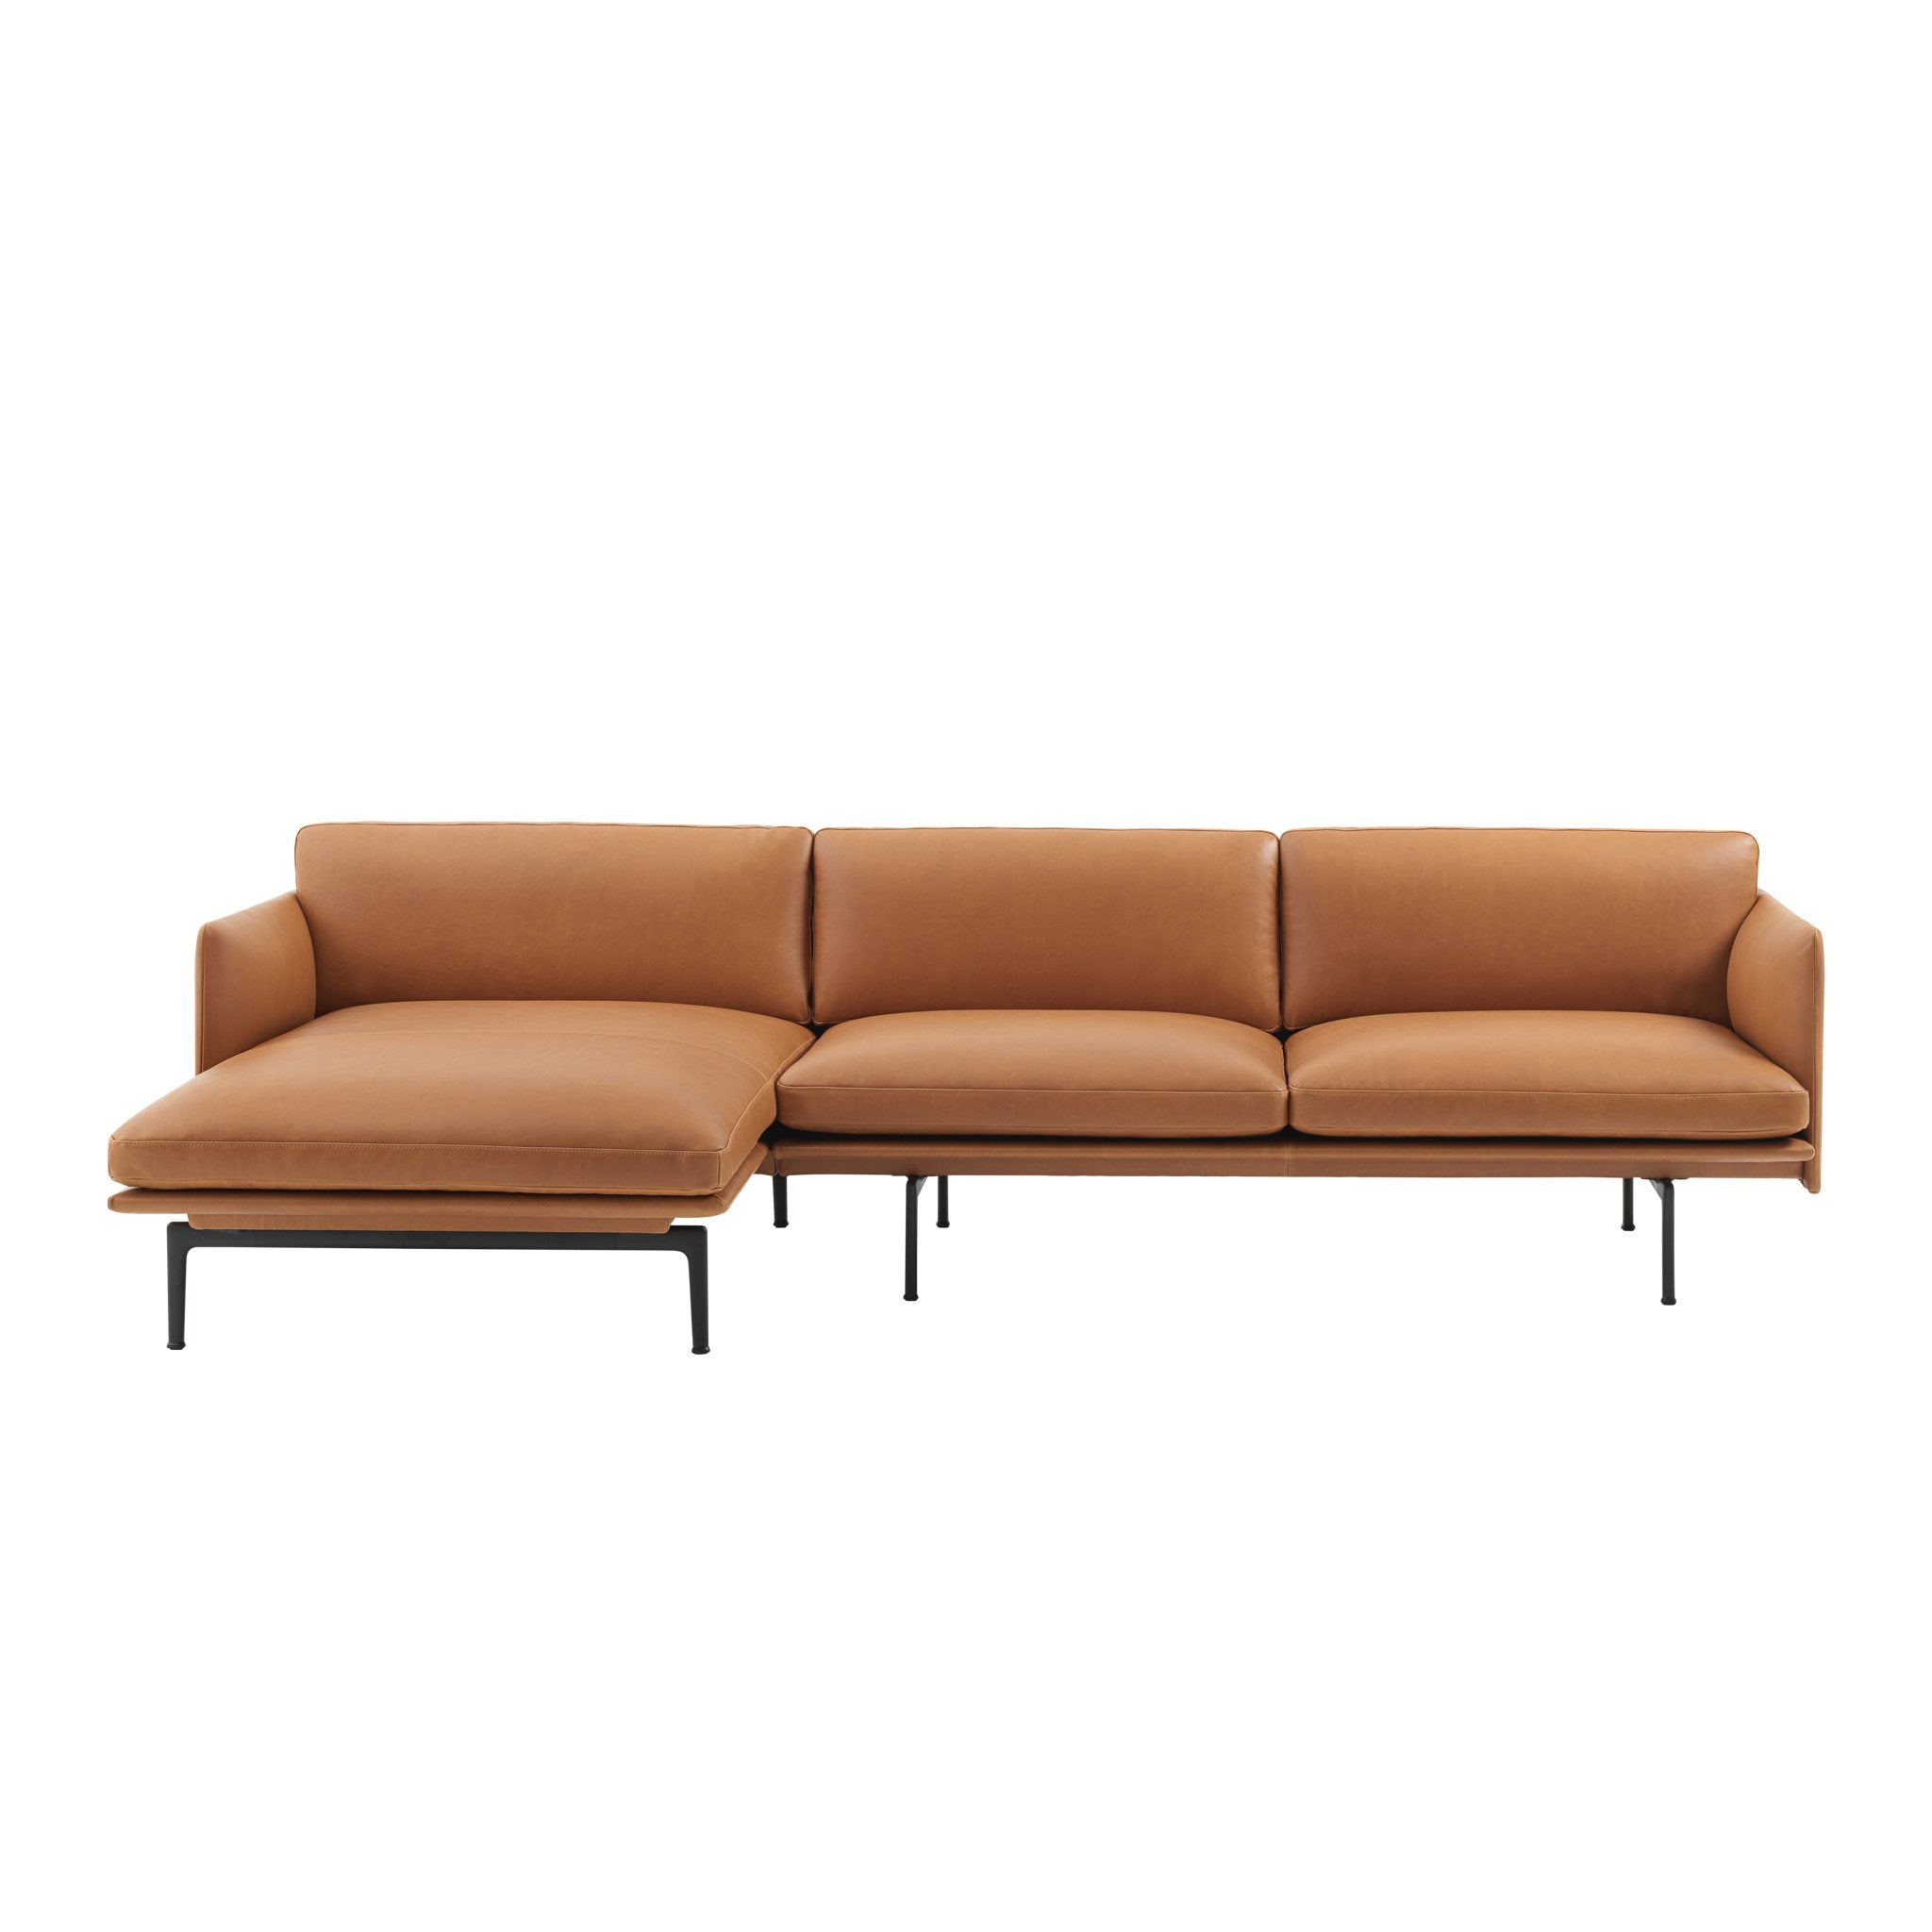 Outline Sofa With Chaise Longue By